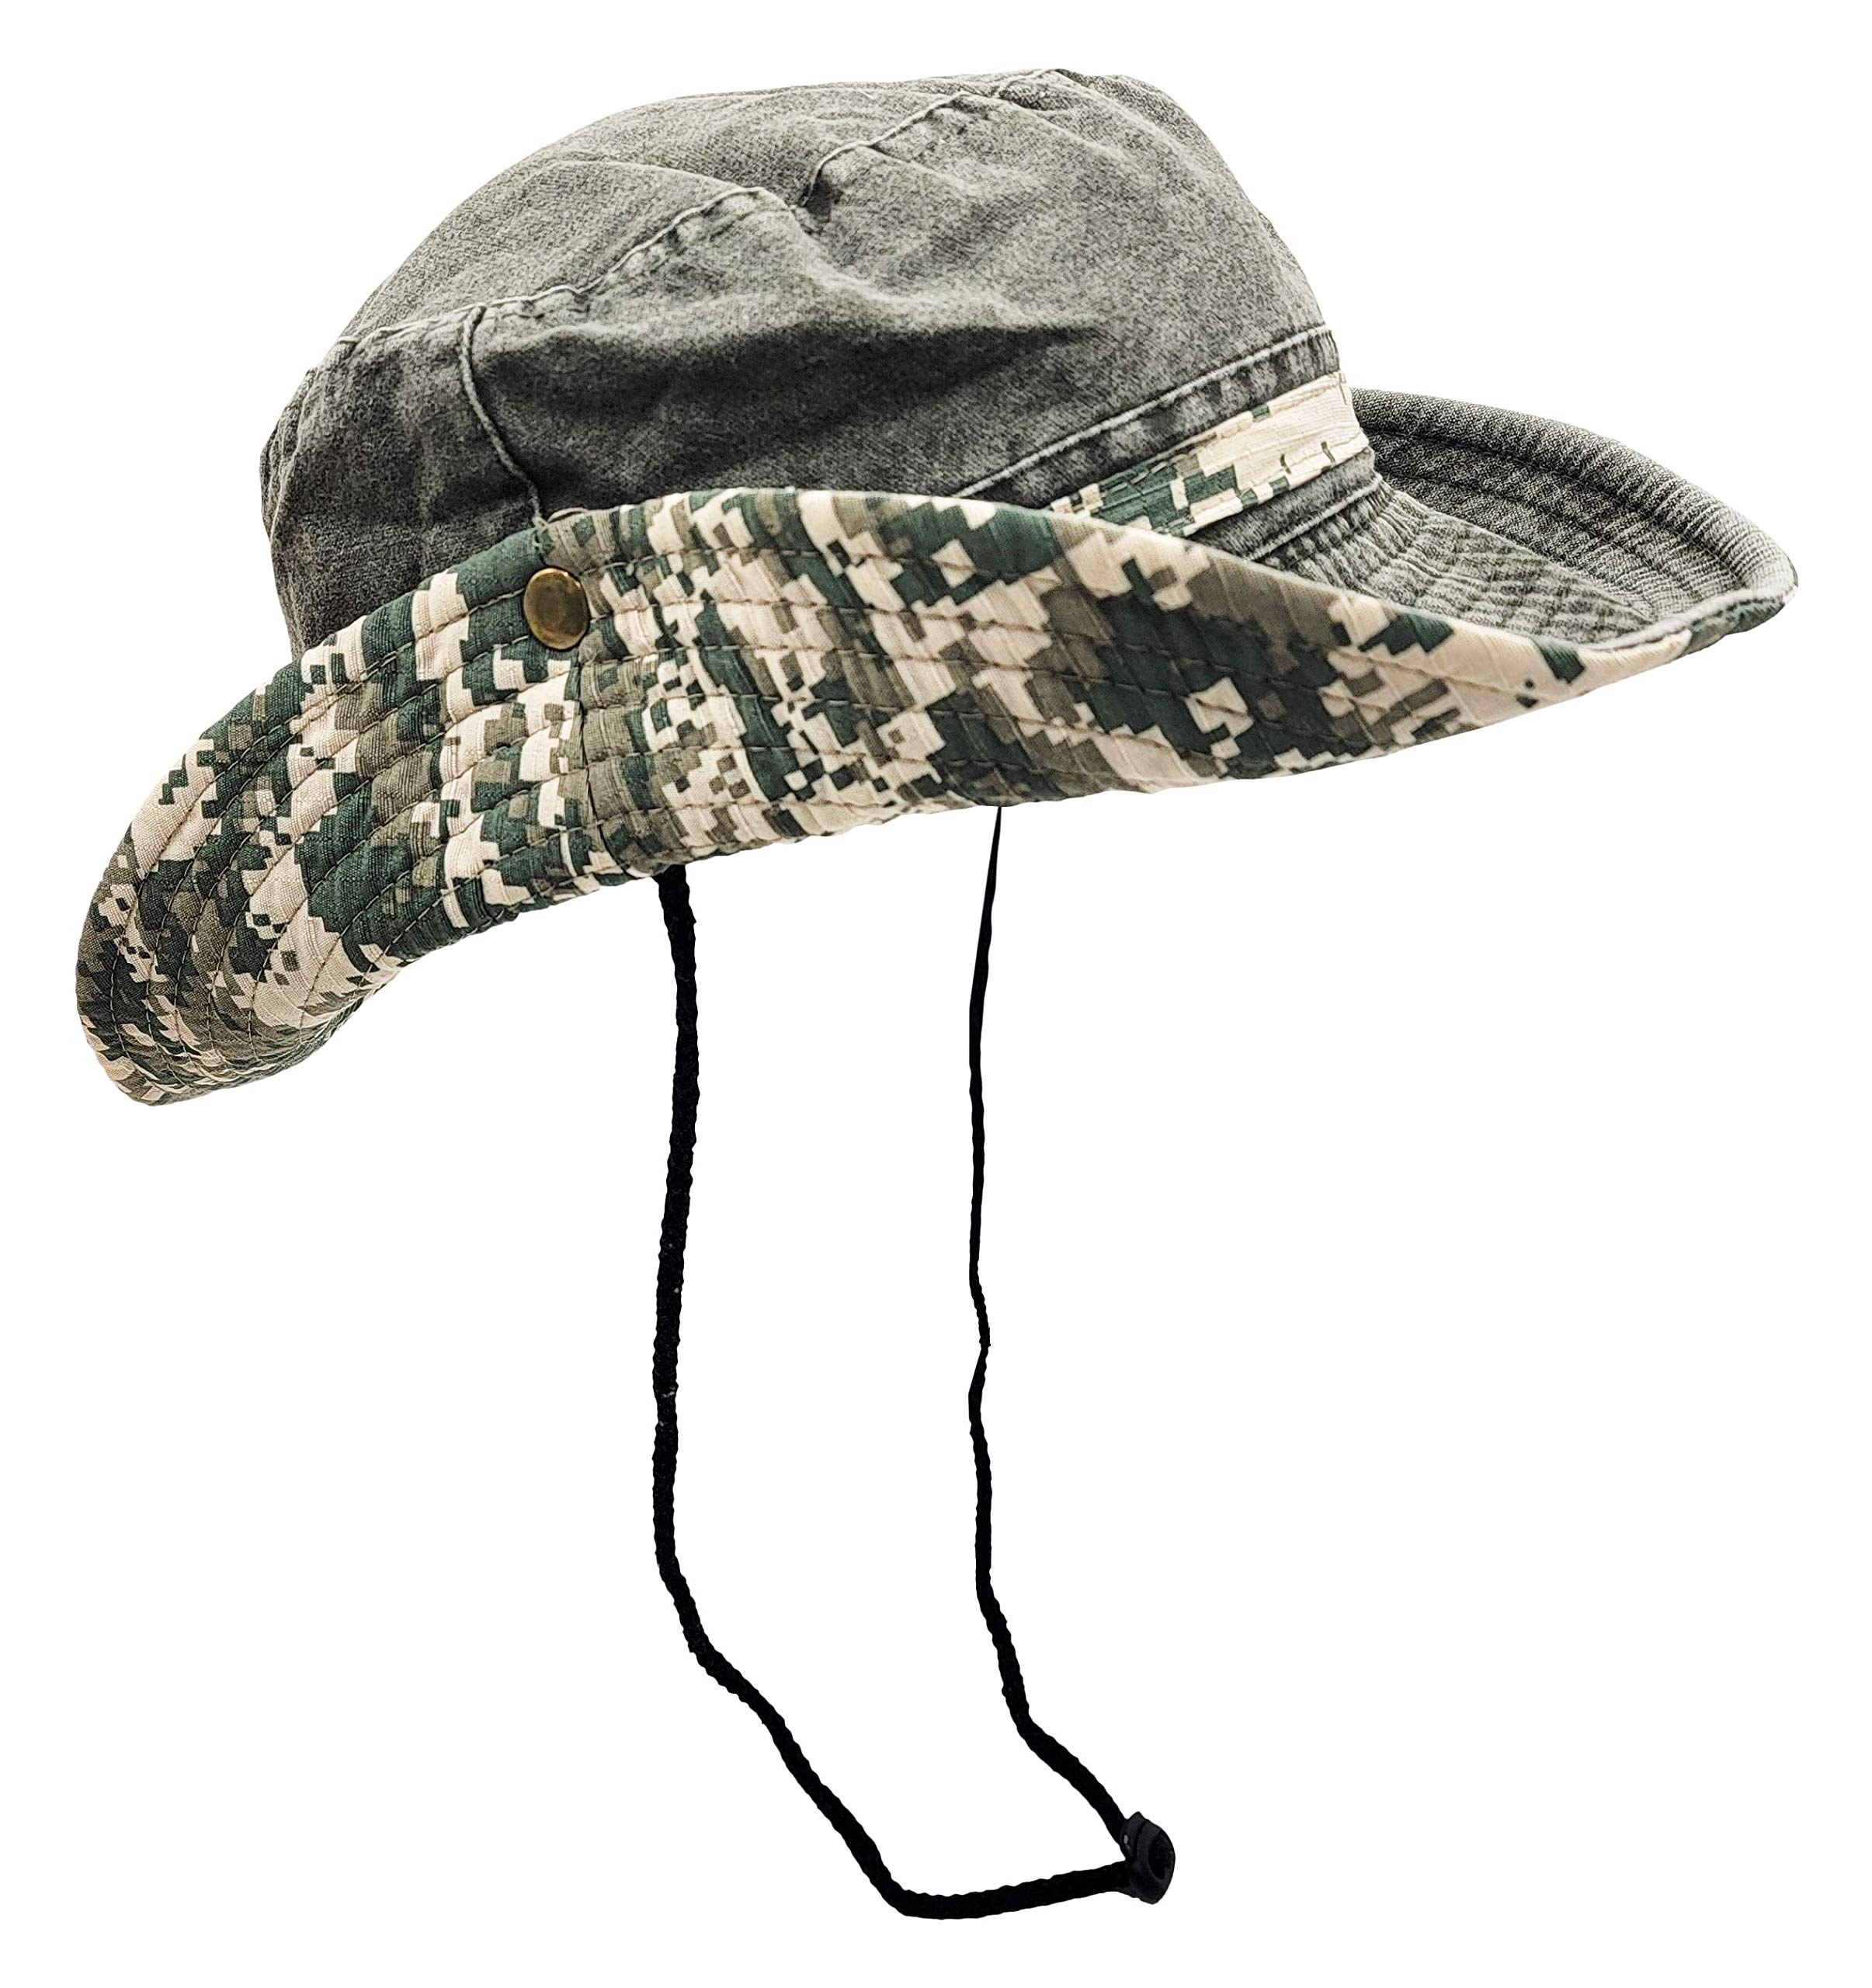 Outdoor Boonie Sun Hat for Hiking, Camping, Fishing, Operator Floppy  Military Camo Summer Cap for Men or Women Army Green